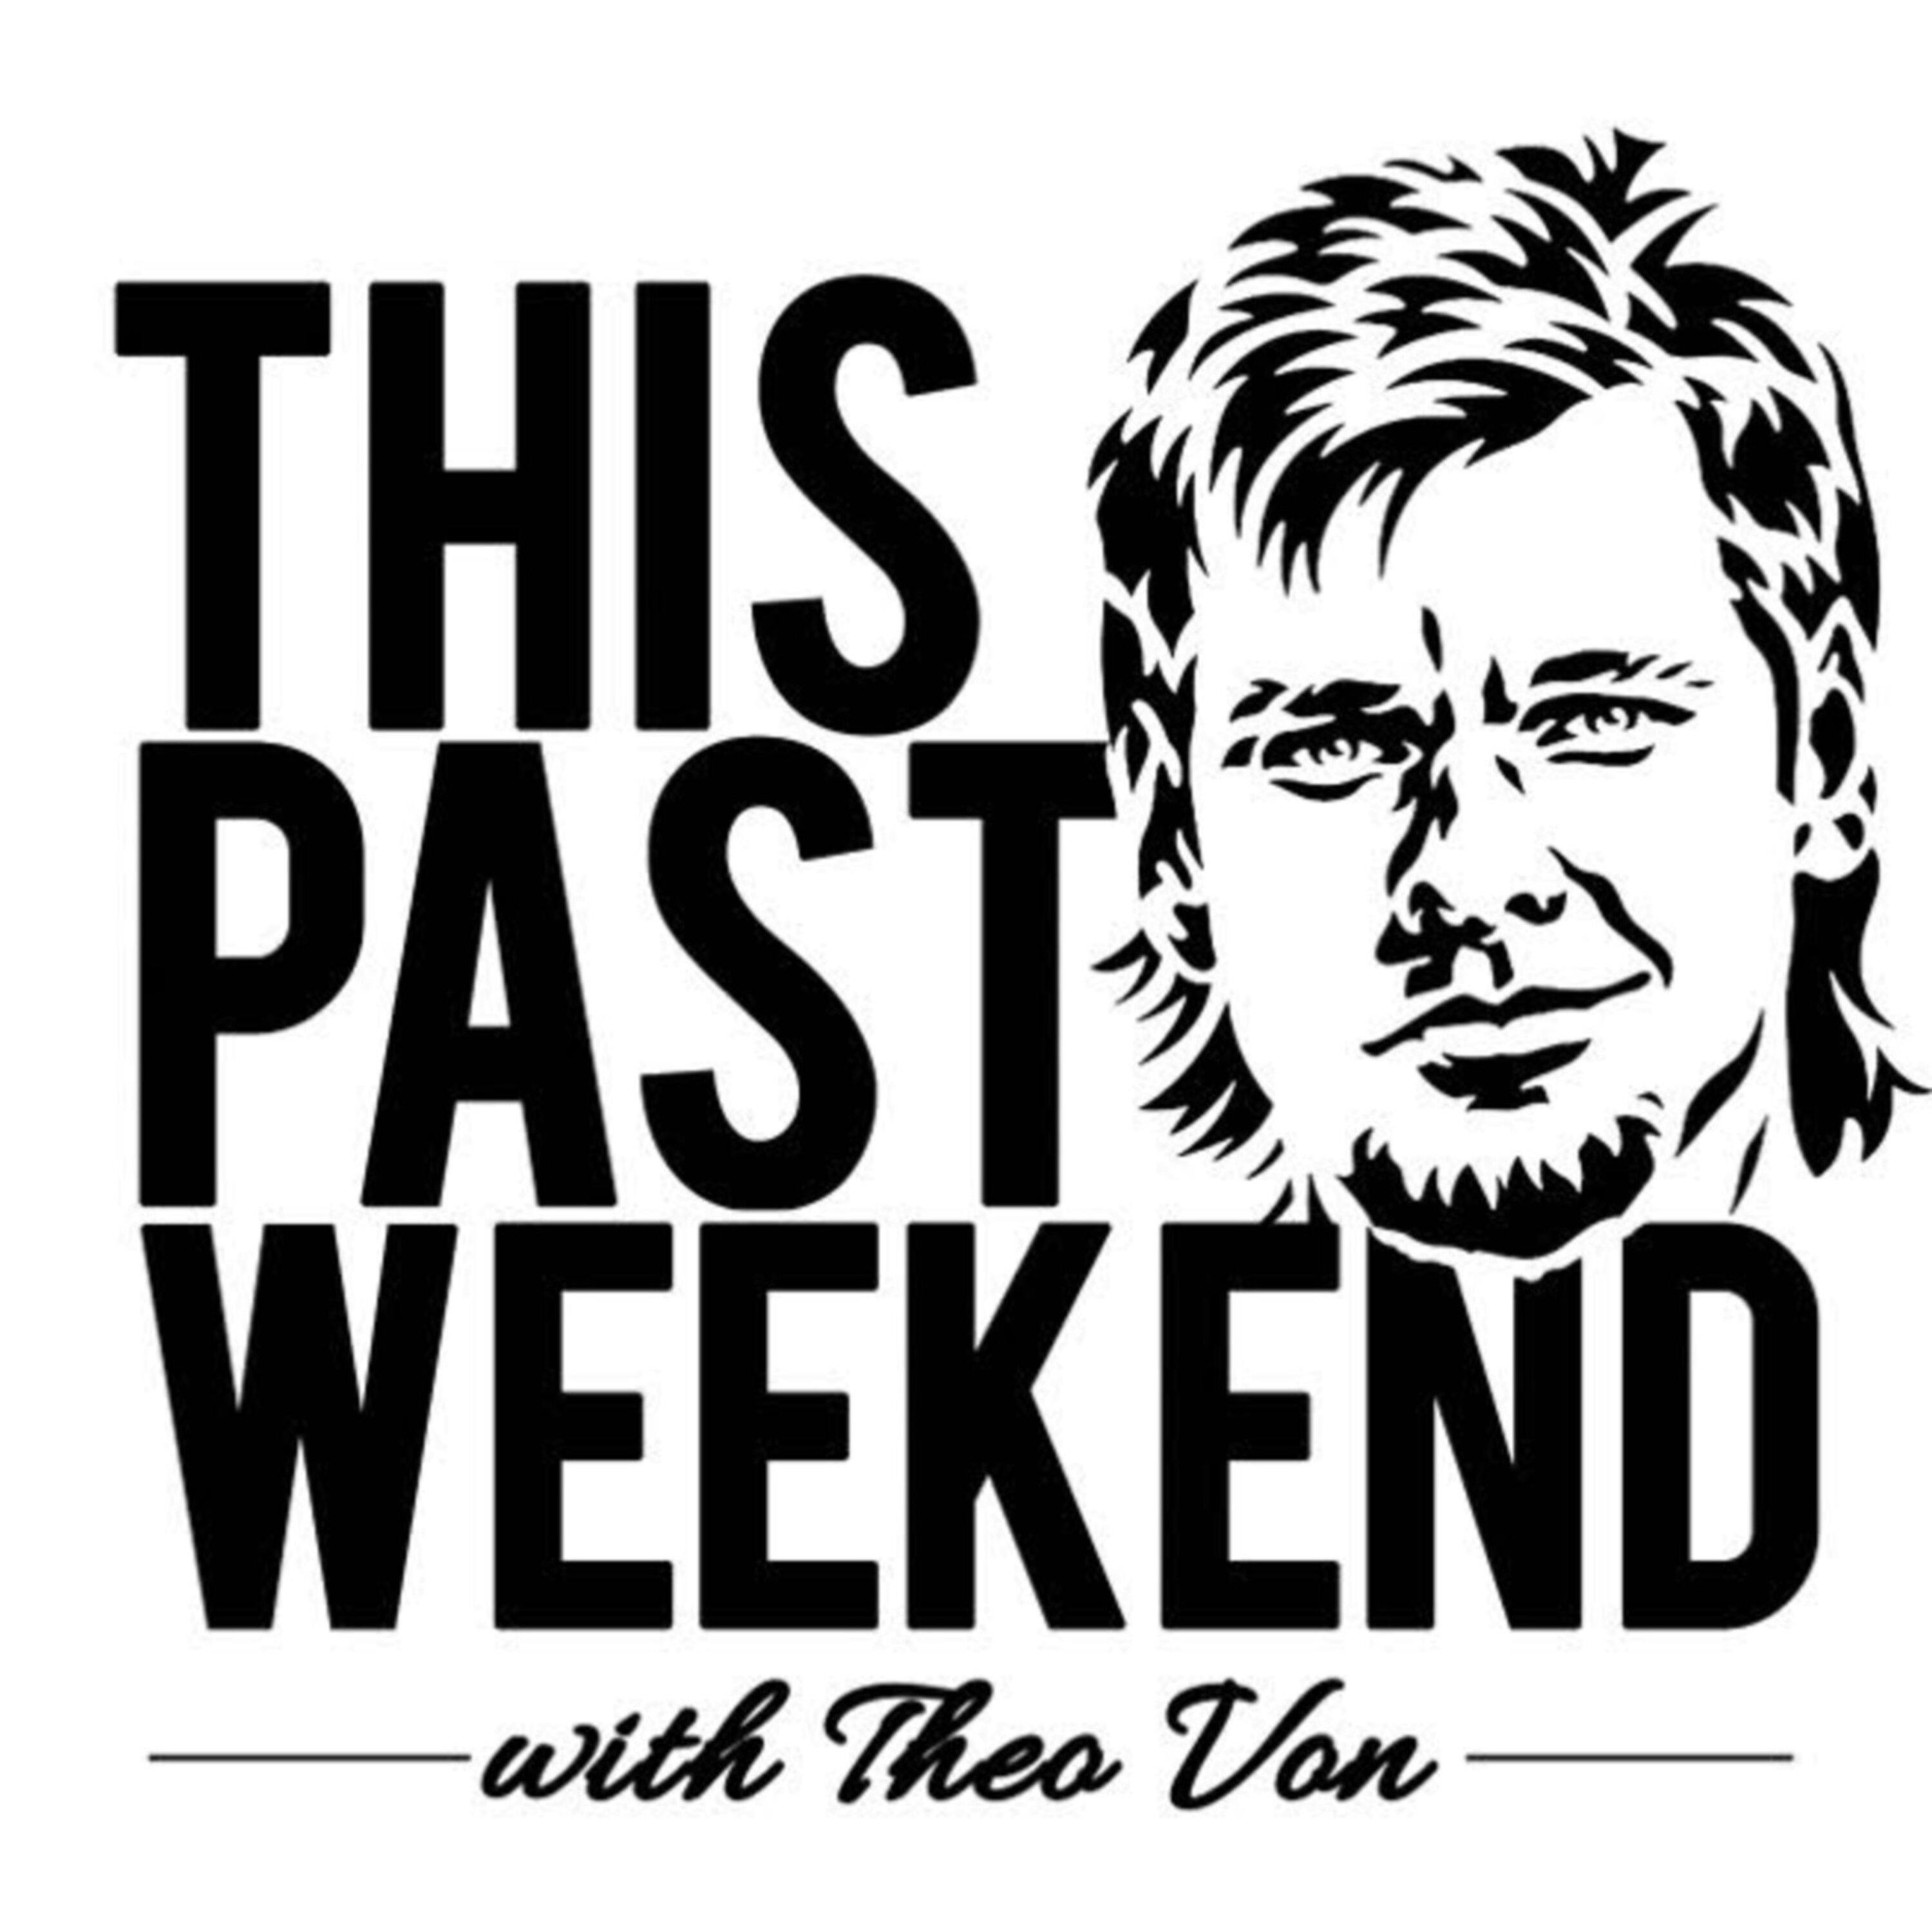 First Sip from the Hose | This Past Weekend #212 by Theo Von